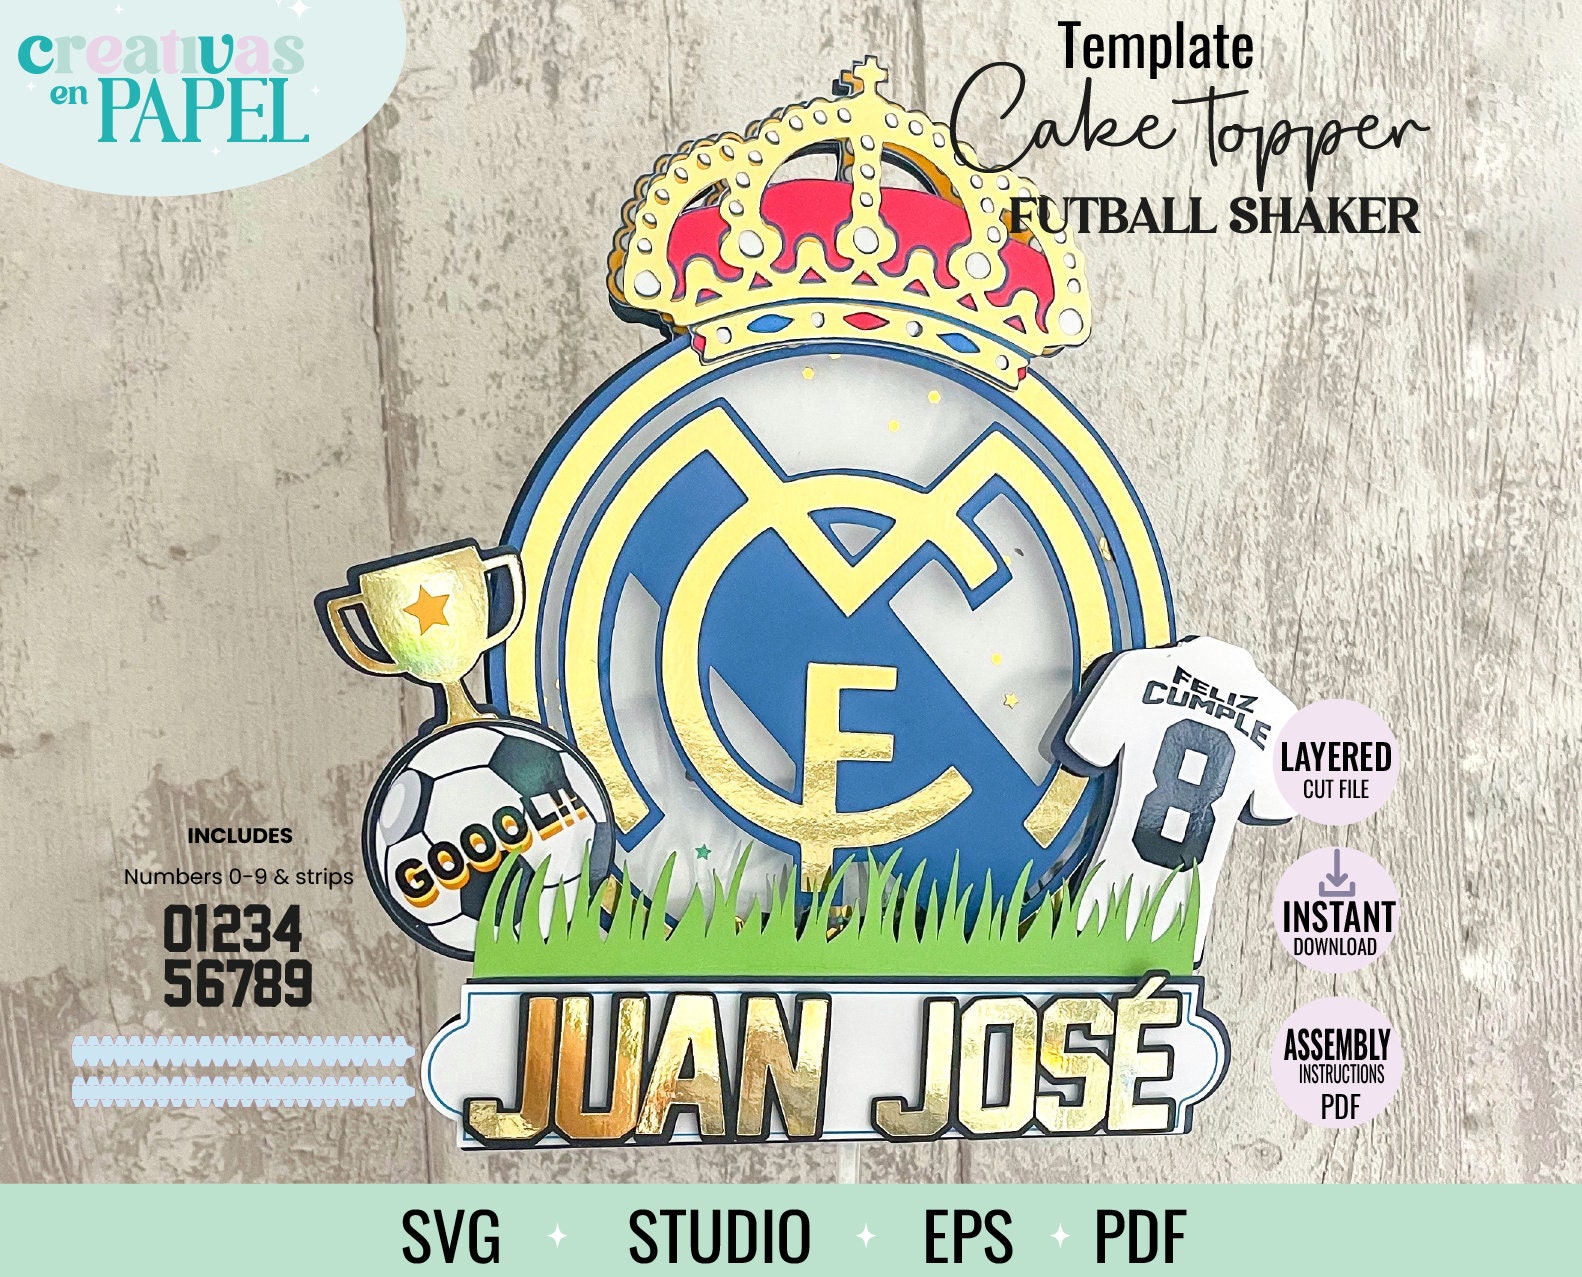  Real Madrid CF Party Decorations,Soccer Birthday Party Supplies  Includes Banner - Cake Topper - 12 Cupcake Toppers - 18 Balloons : Toys &  Games